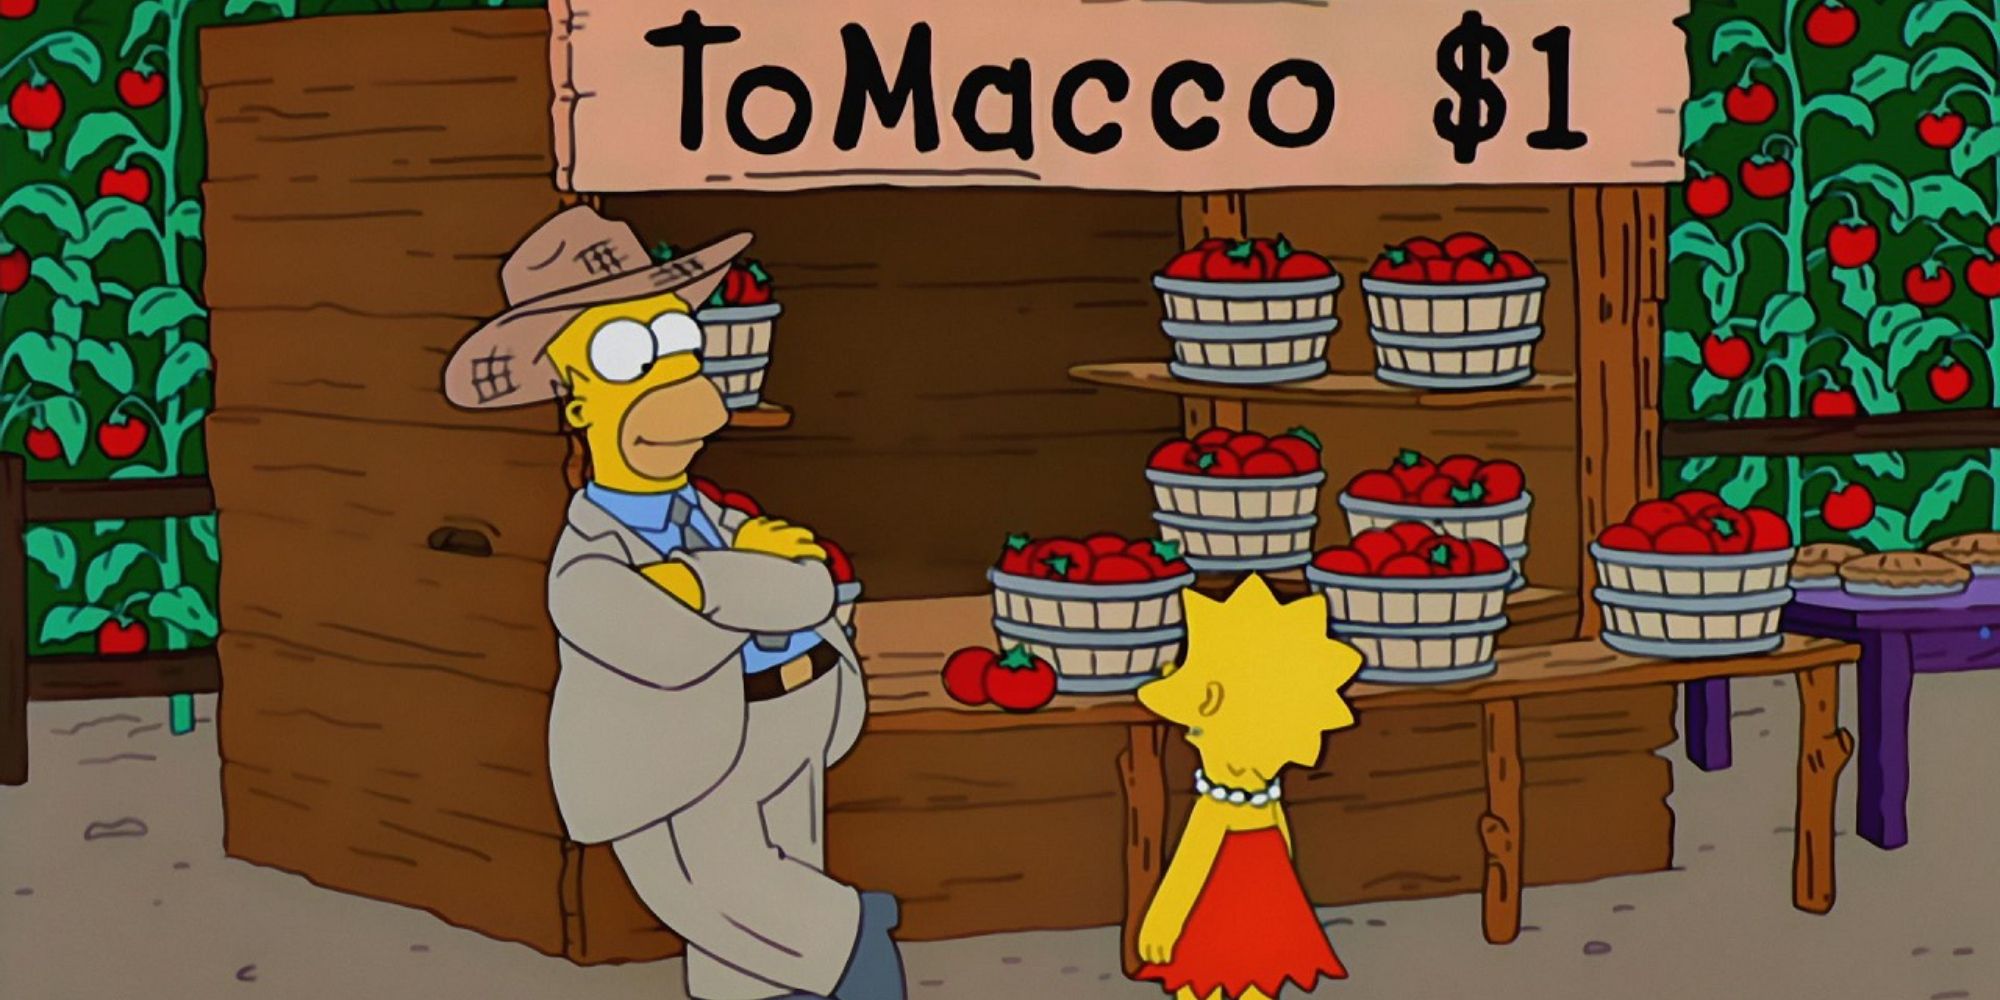 Homer and Lisa by the Tomacco stall in The Simpsons